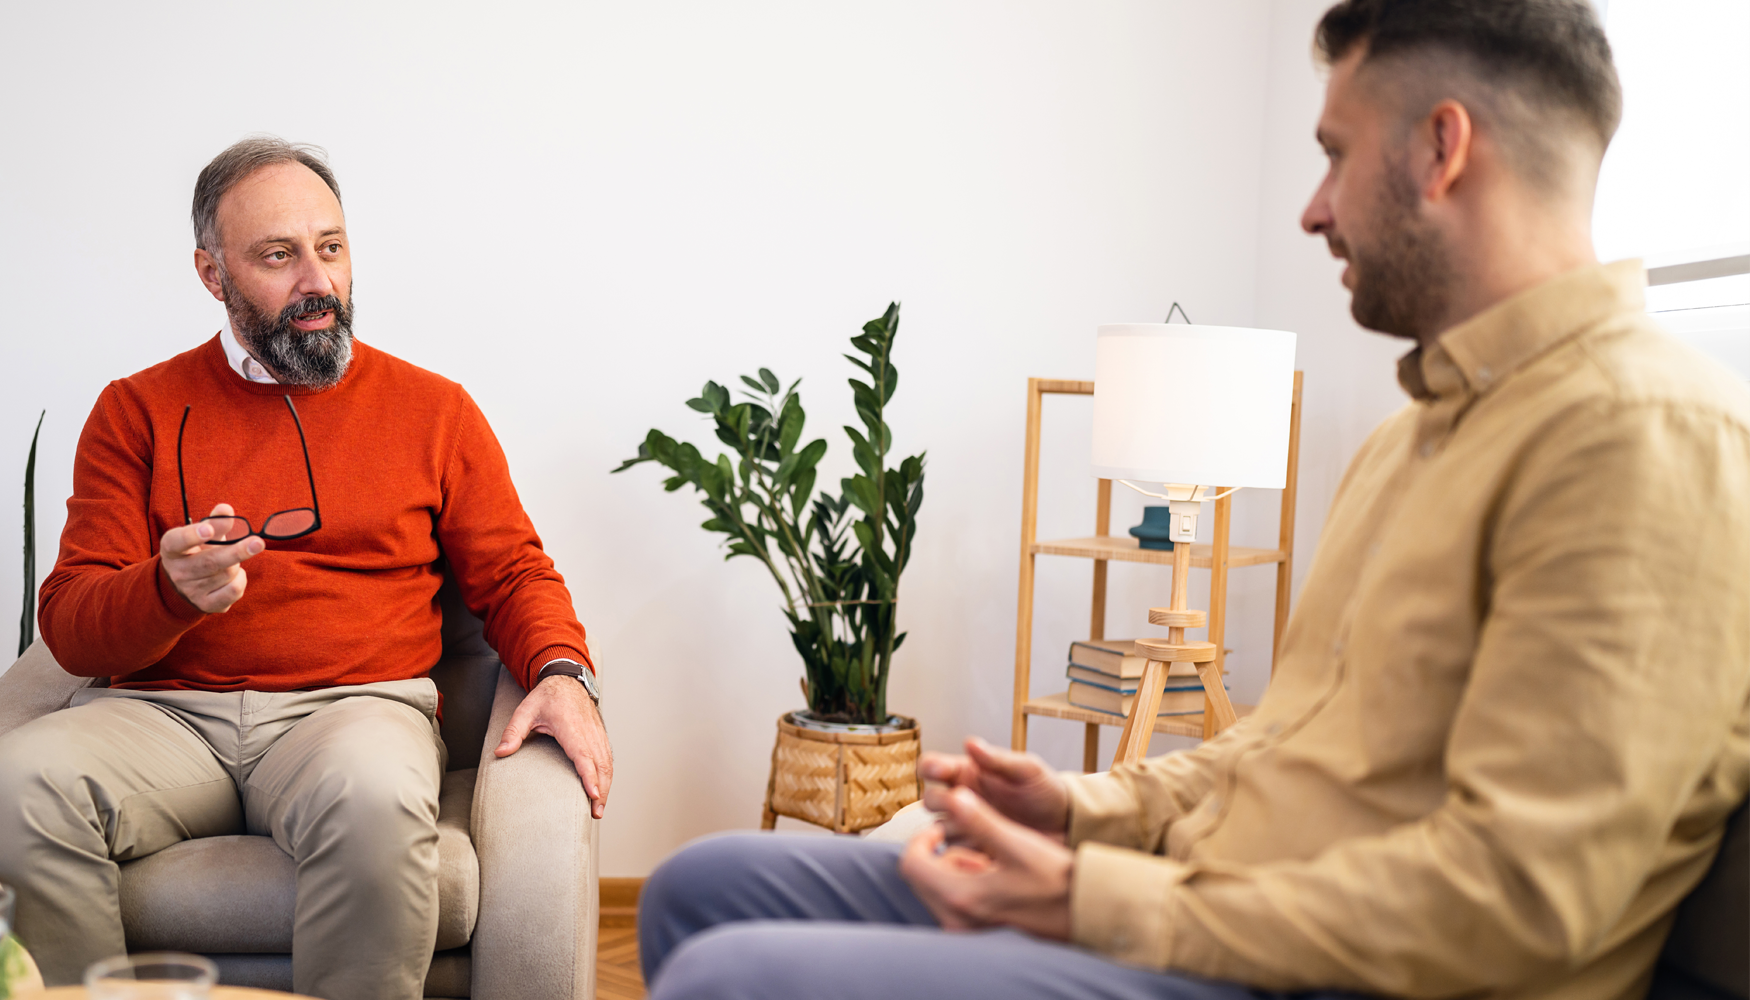 A photo of two men engaged in a conversation with each other. One of the men appears to be a counsellor providing advice to the other.